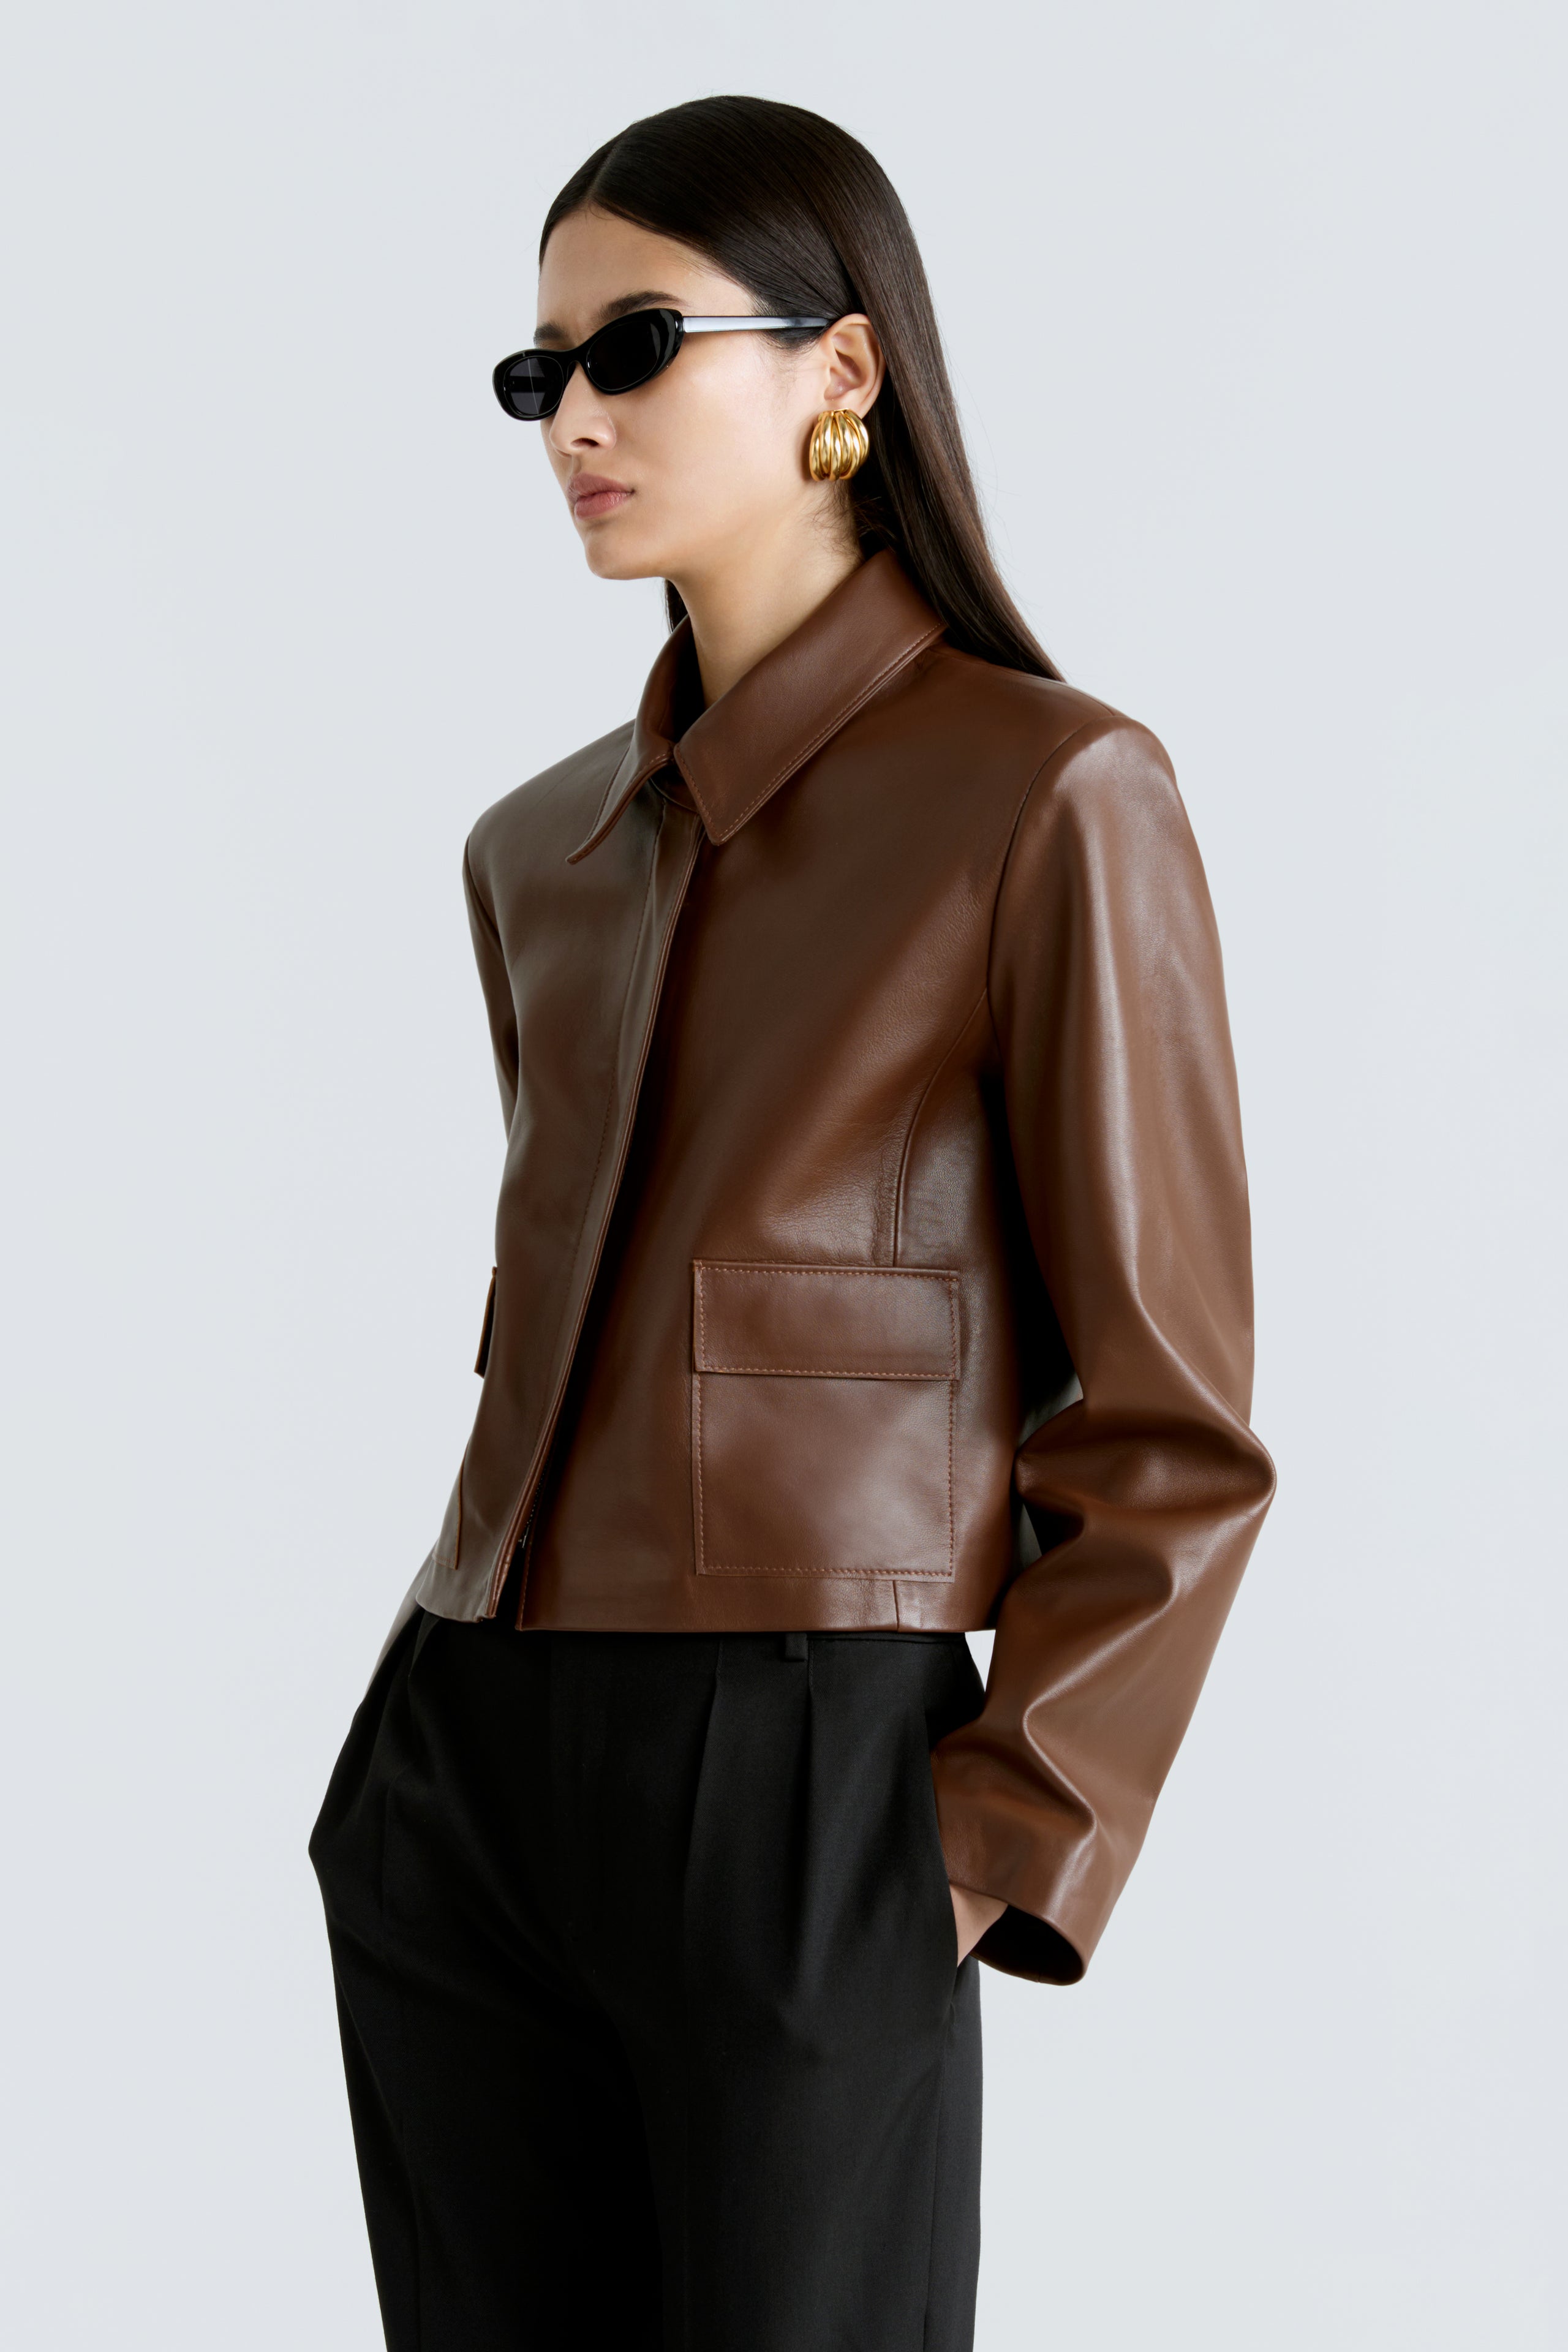 Model is wearing the Bleeker Milk Chocolate Cropped Leather Jacket Close Up